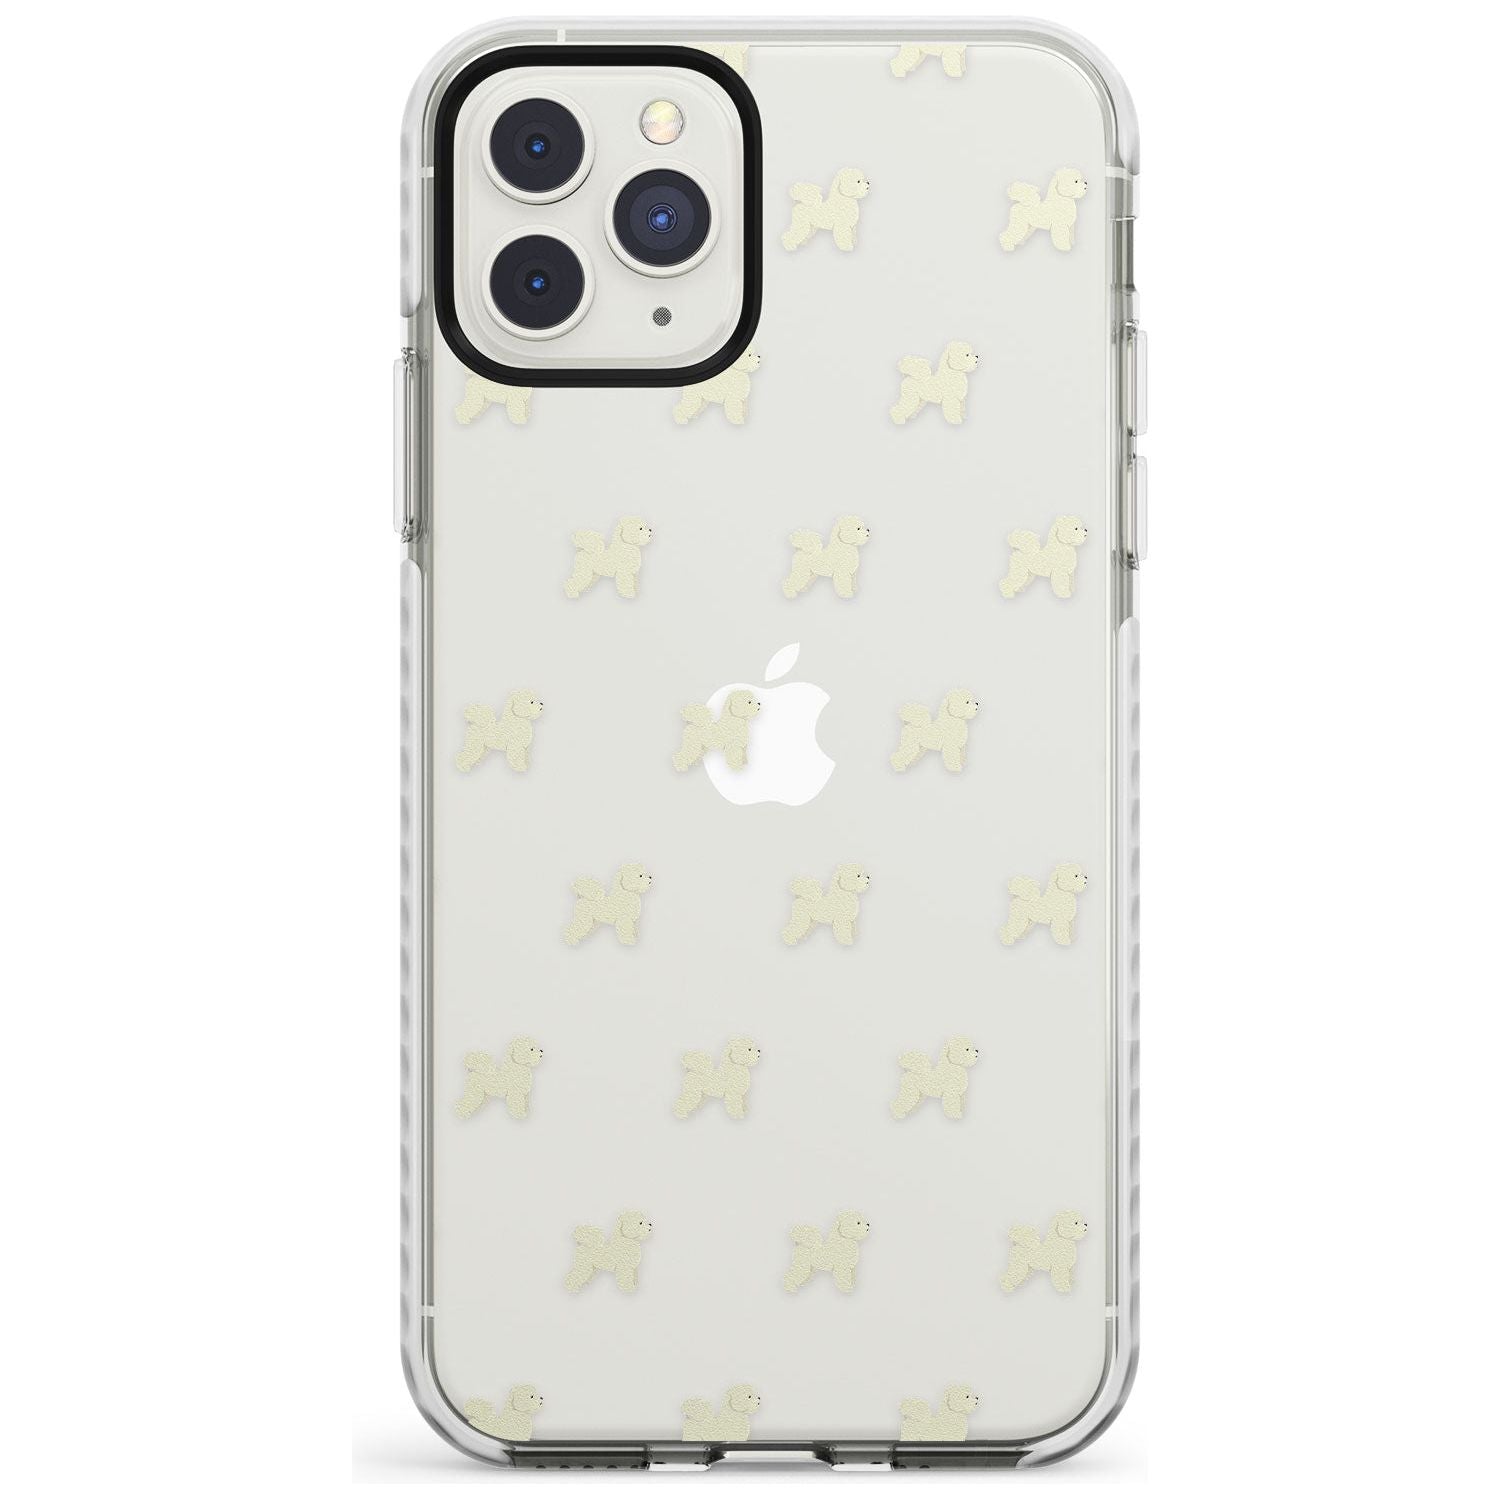 Bichon Frise Dog Pattern Clear Impact Phone Case for iPhone 11 Pro Max